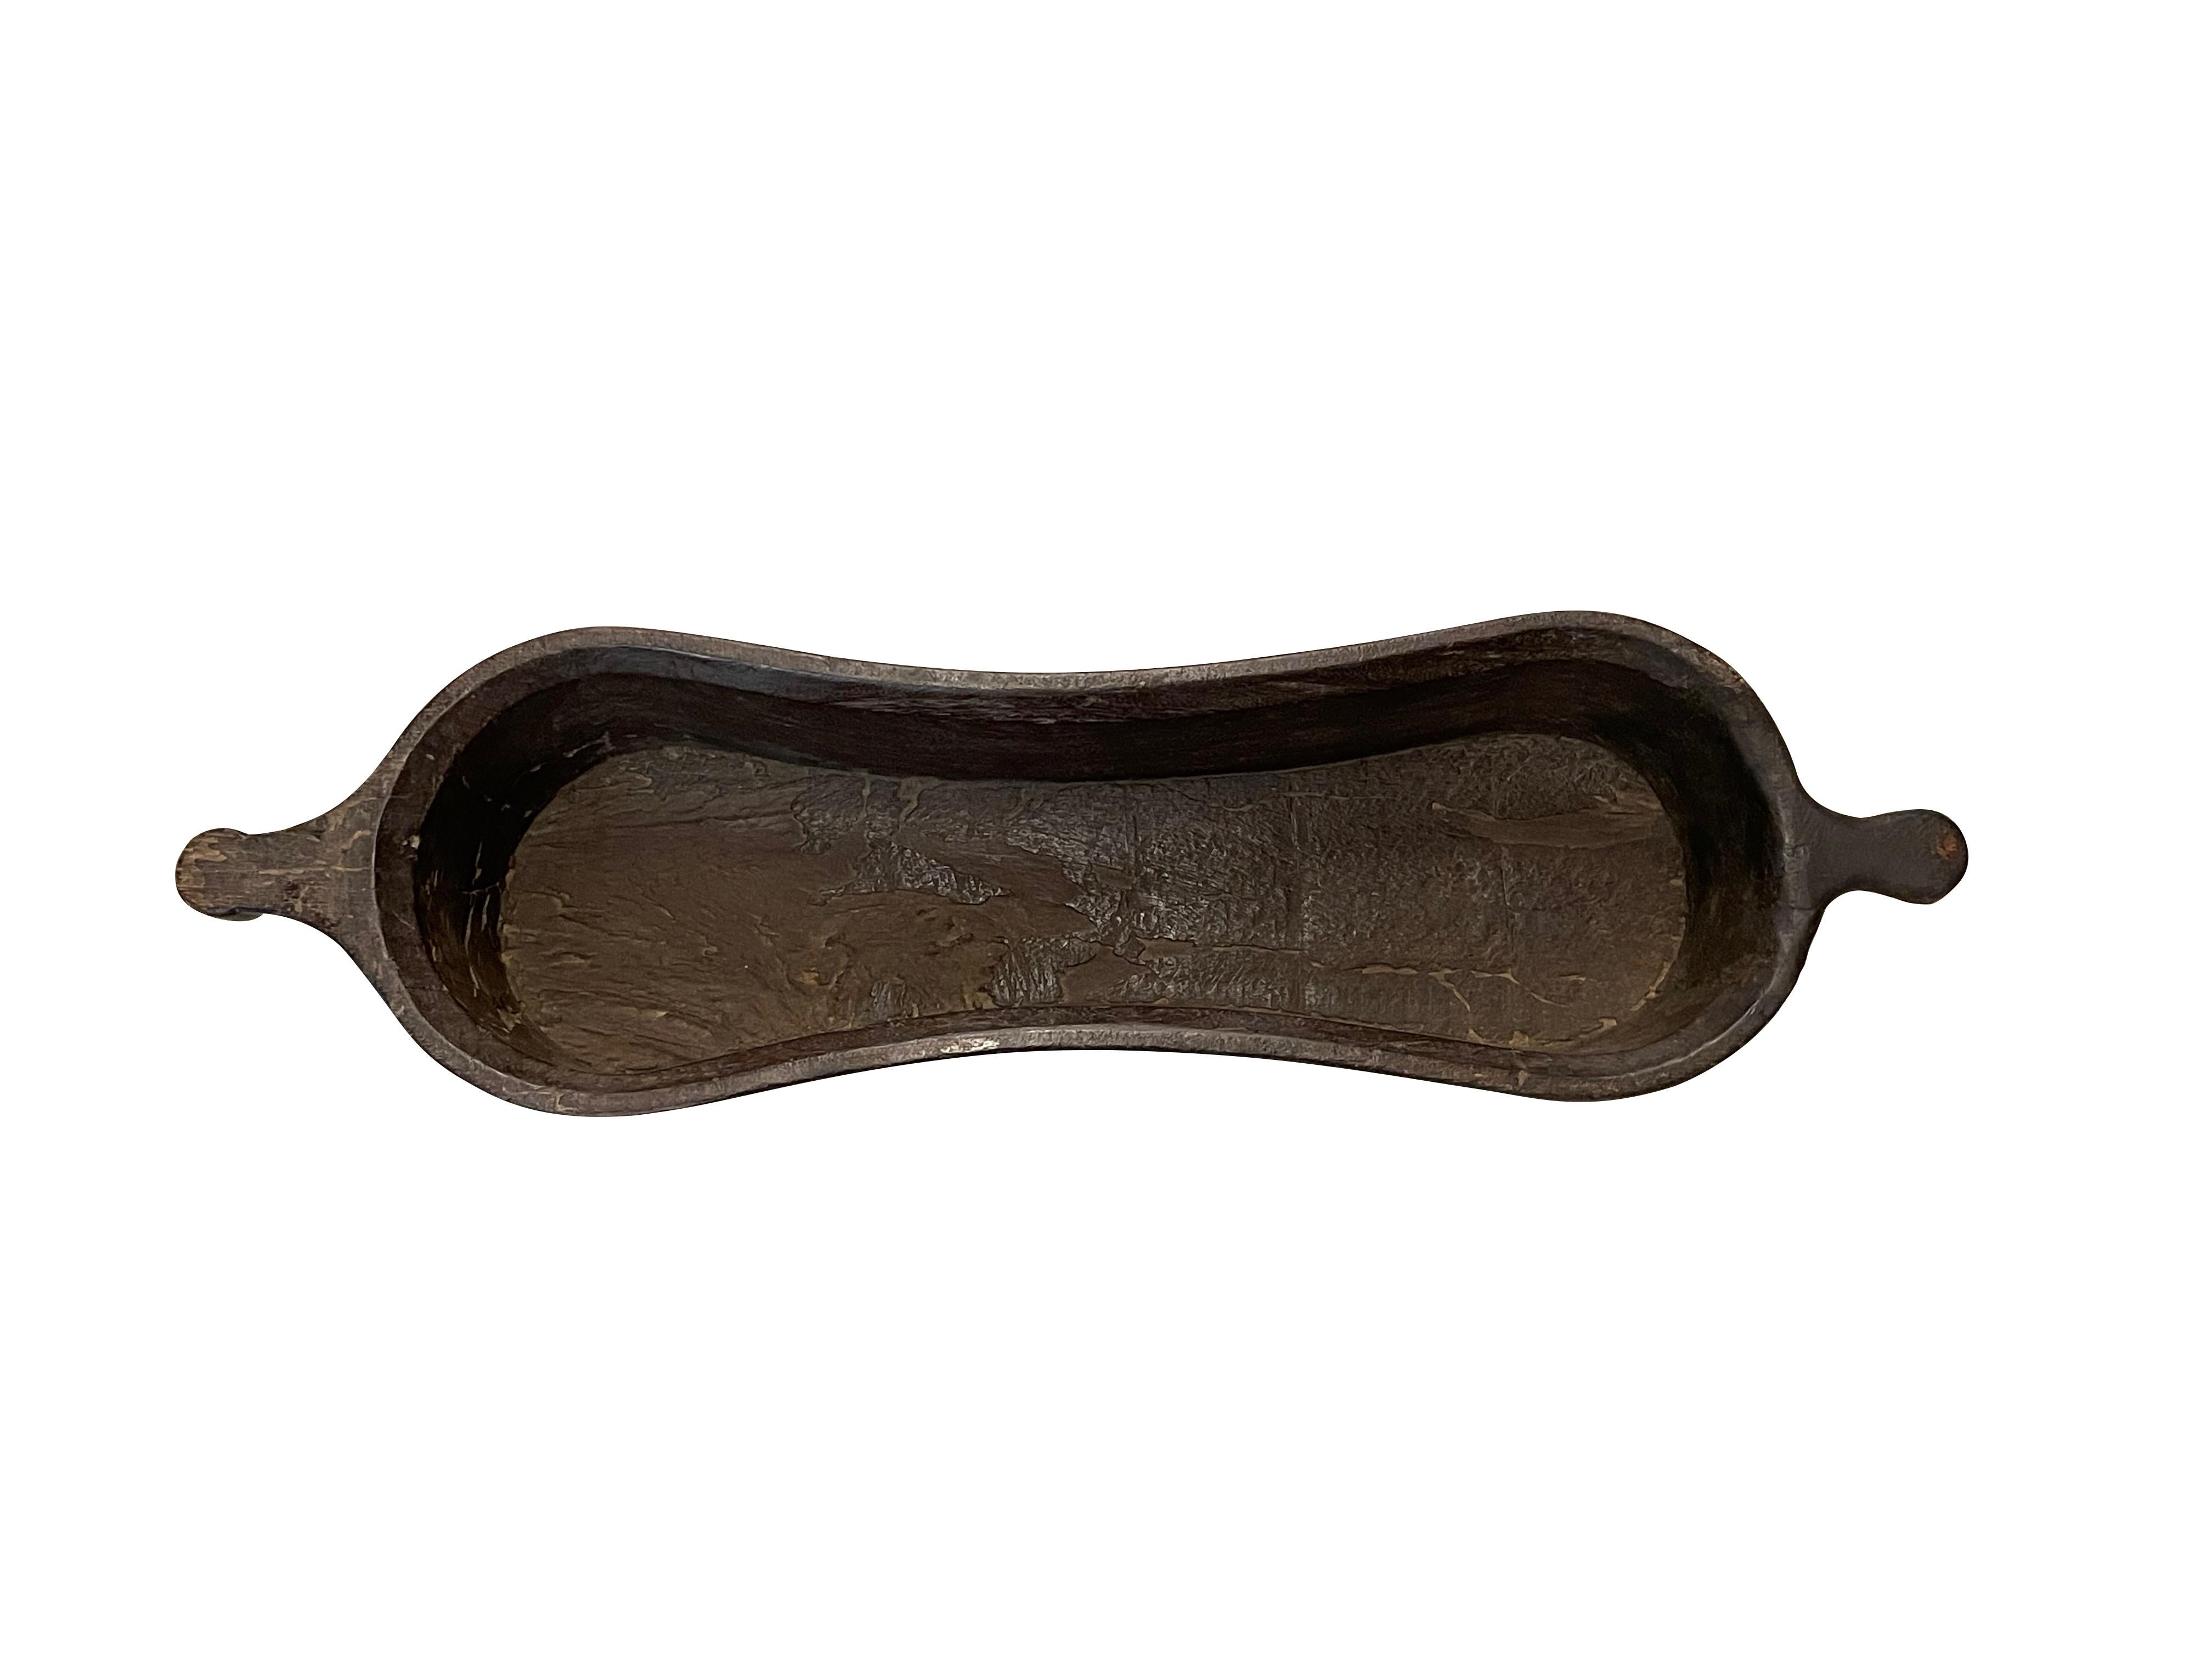 19th century Indonesian large carved wooden bowl with hour glass shape.
Two handles.
Used for transporting and serving food.
